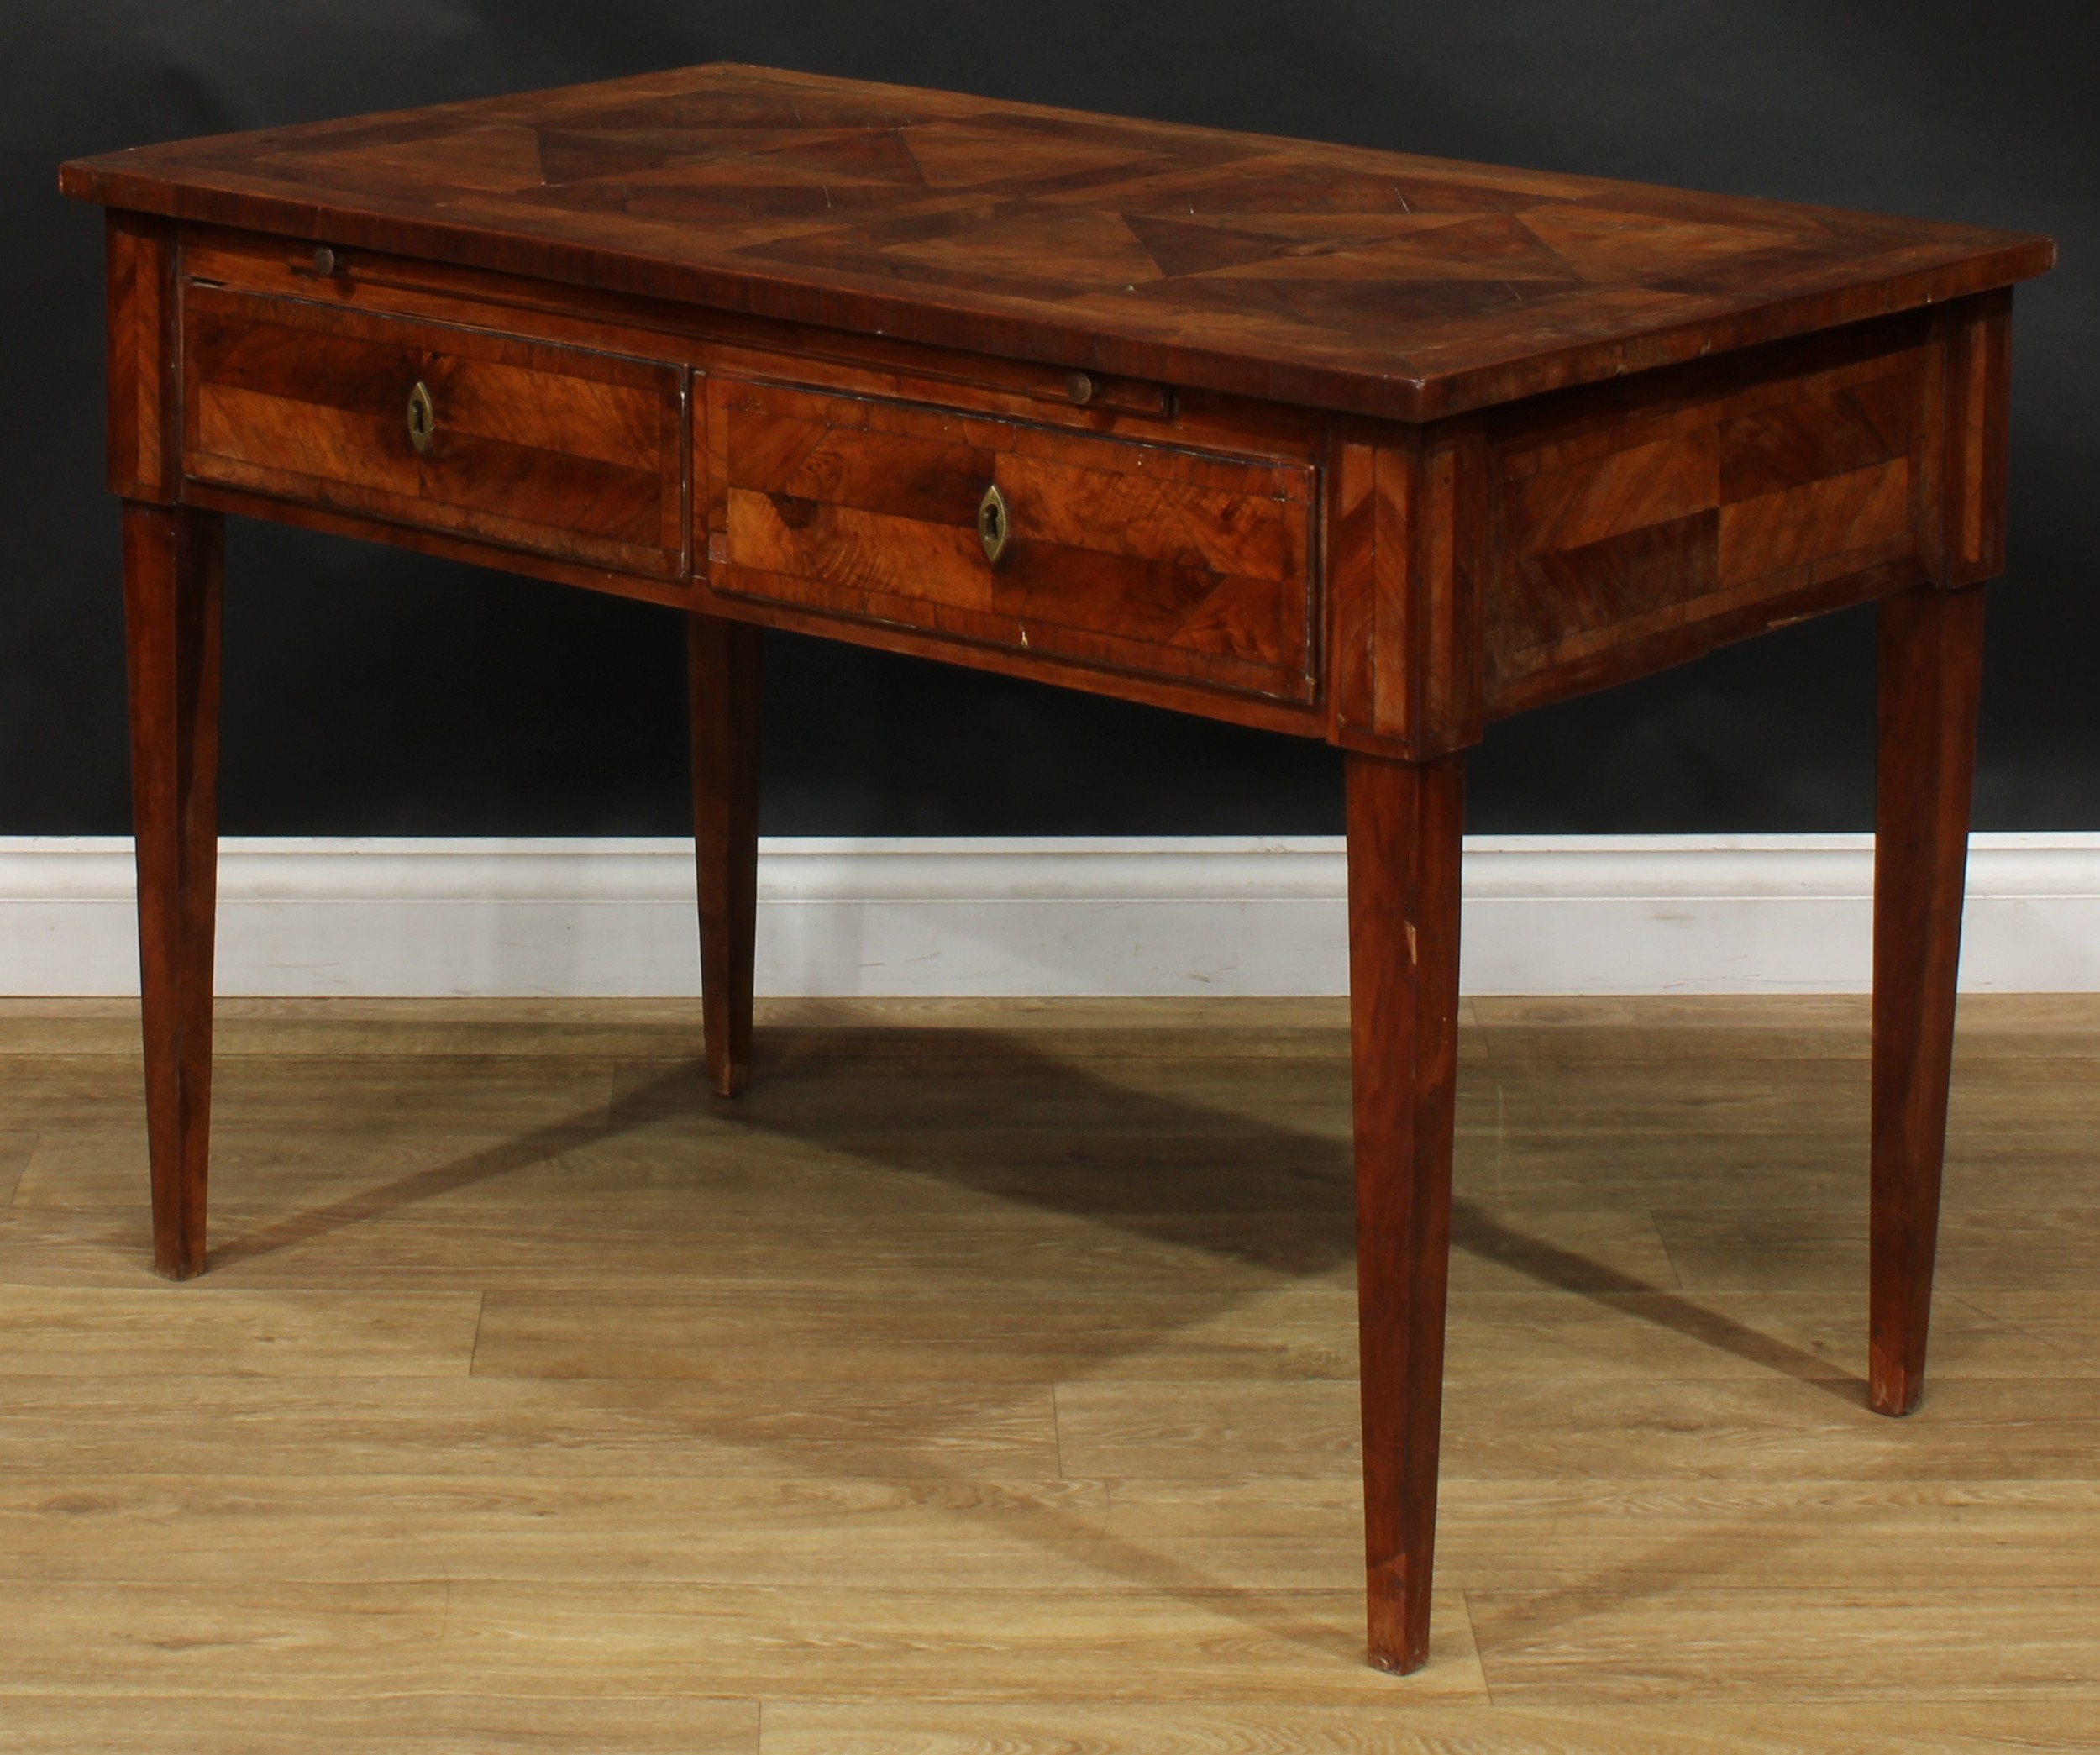 An 18th century French Provincial side table, rectangular top with geometric parquetry veneers, - Image 6 of 7